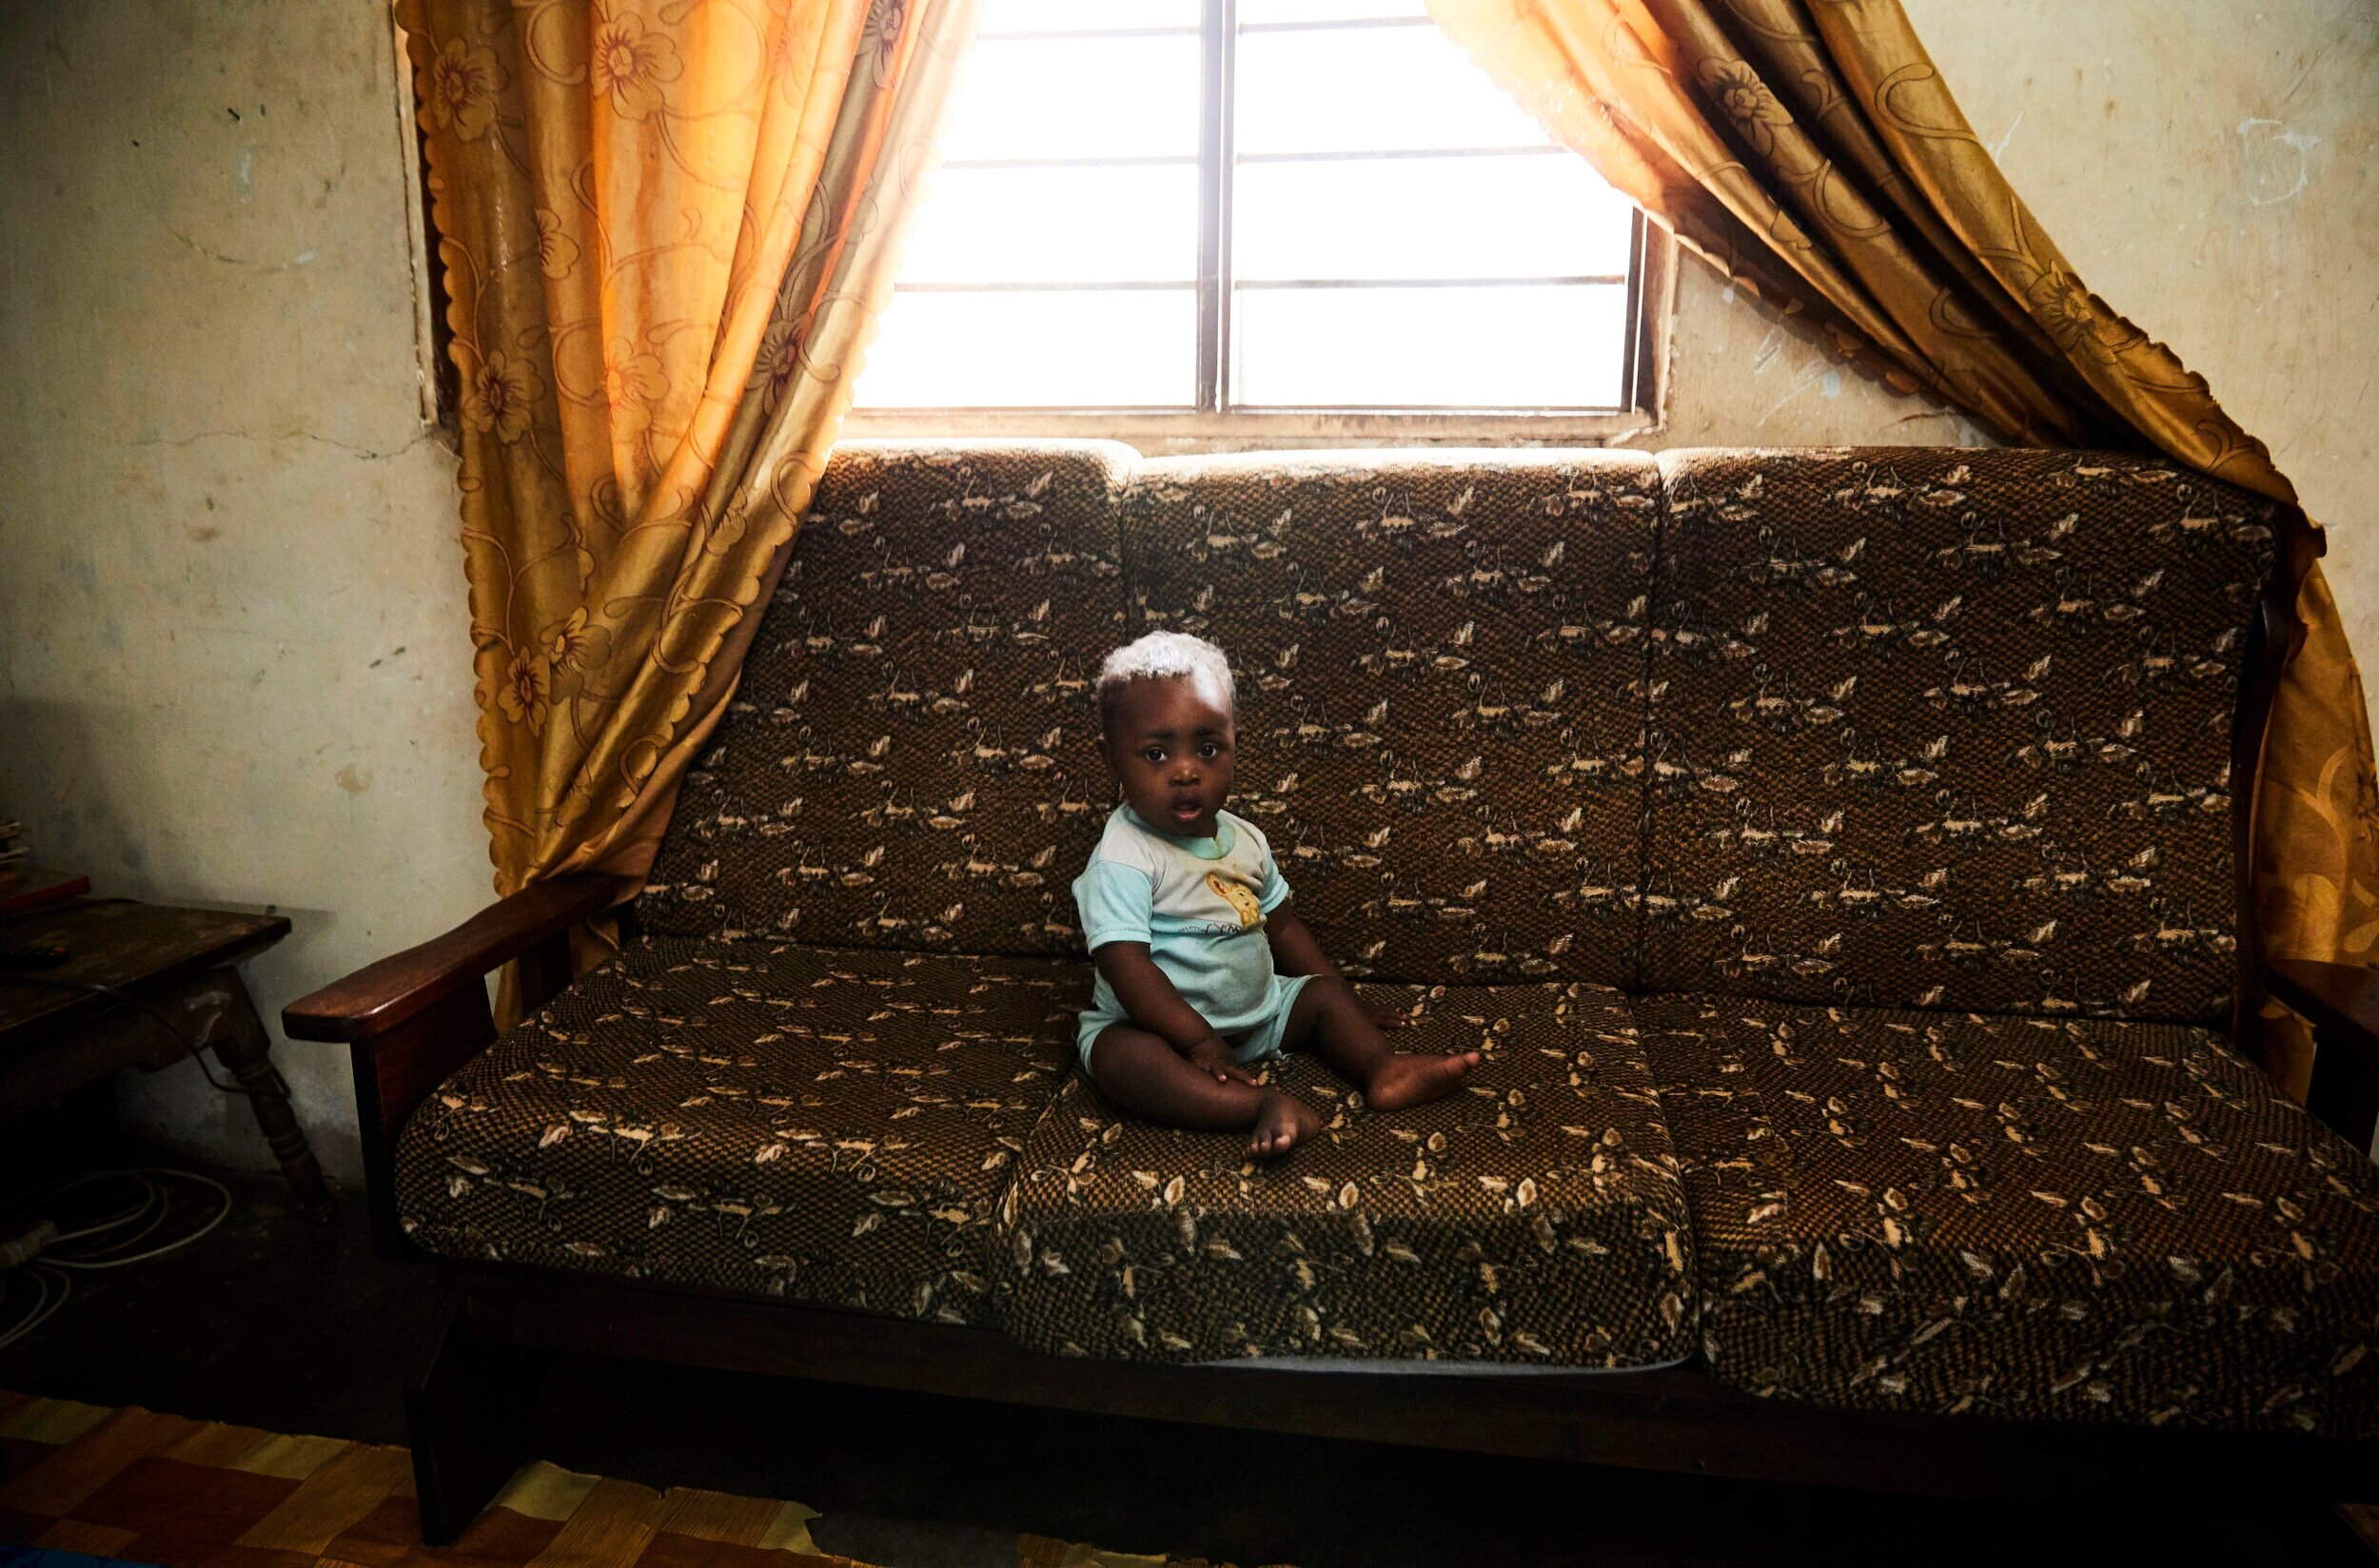  1 year old Nurdiin, born with Down Syndrome sits on the couch of his home. He is the youngest child of his 43-year-old mother, Salha Abdallah, who has 7 children in total including him.  The two of them go twice weekly to  Mwanahija Mzee’s tradition